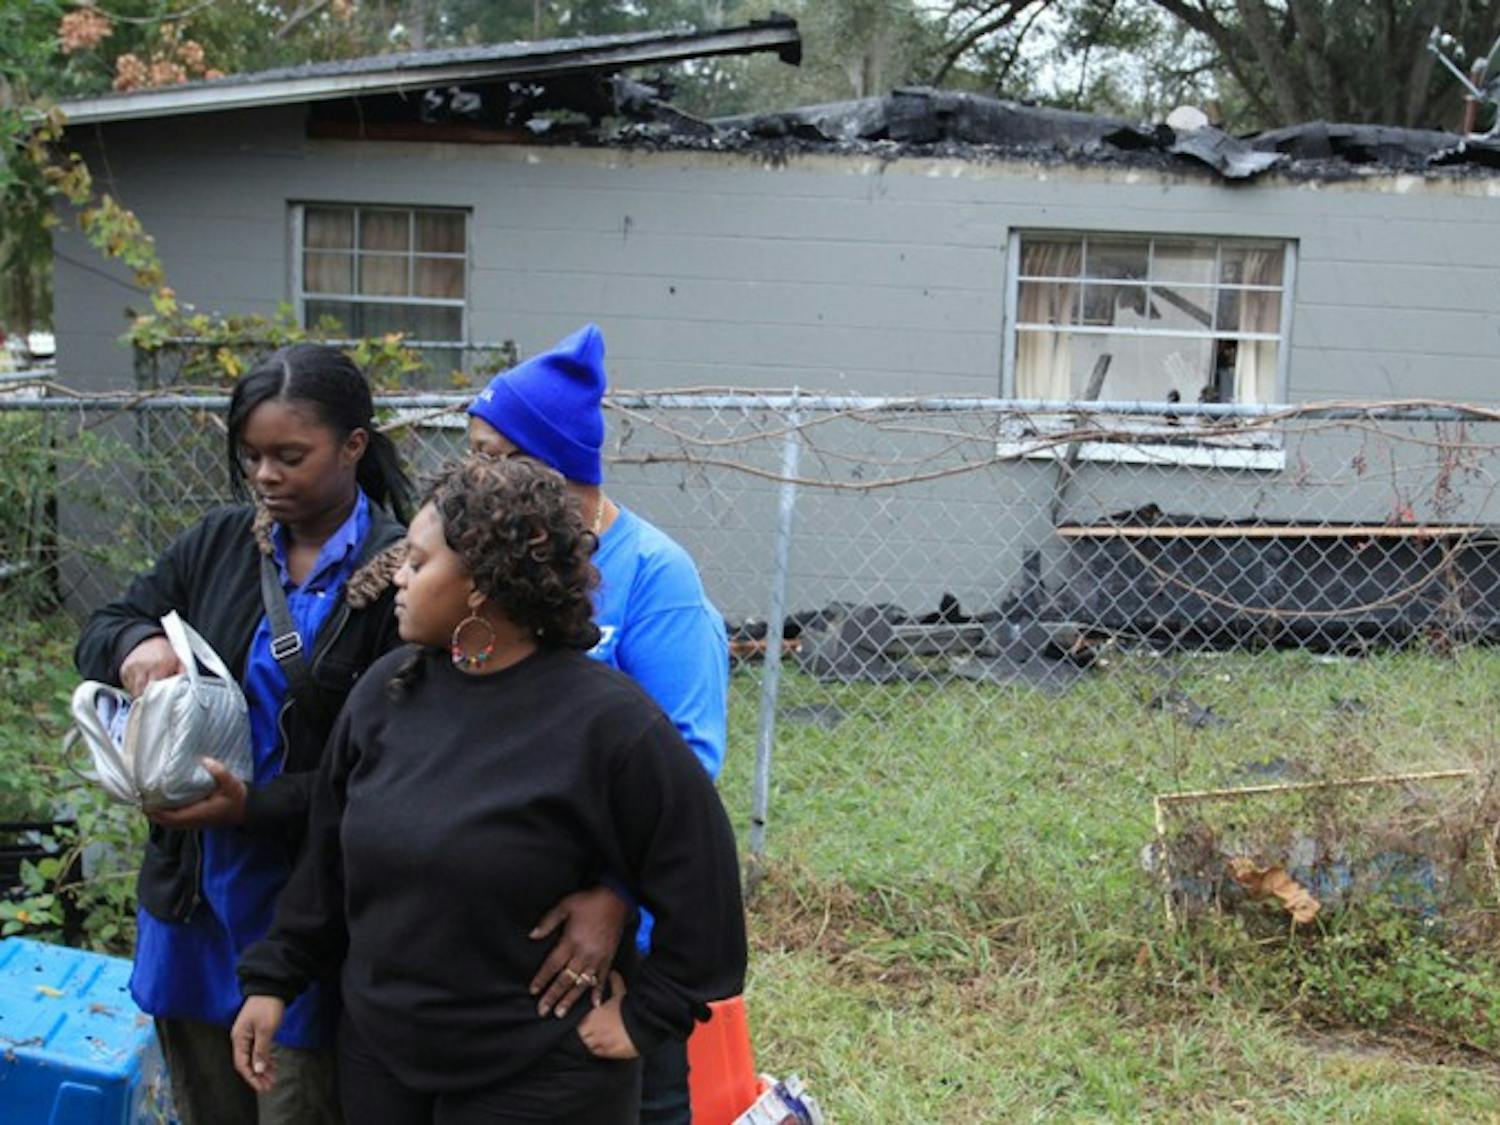 Shamon Williams (LEFT) holds a Bible with her sister Keambrea Smith (CENTER) and family friend Teresa White (BACK) after their house of 11 years caught fire on Friday, Nov. 16. The Bible is one of the only things that escaped from the area affected by the fire that occurred at 1420 SE 41st Place. The Rev. Olivia Campbell Parler will be arranging a fundraising event to help cover the family’s needs. For more information, contact Parler at 352-575-5541.